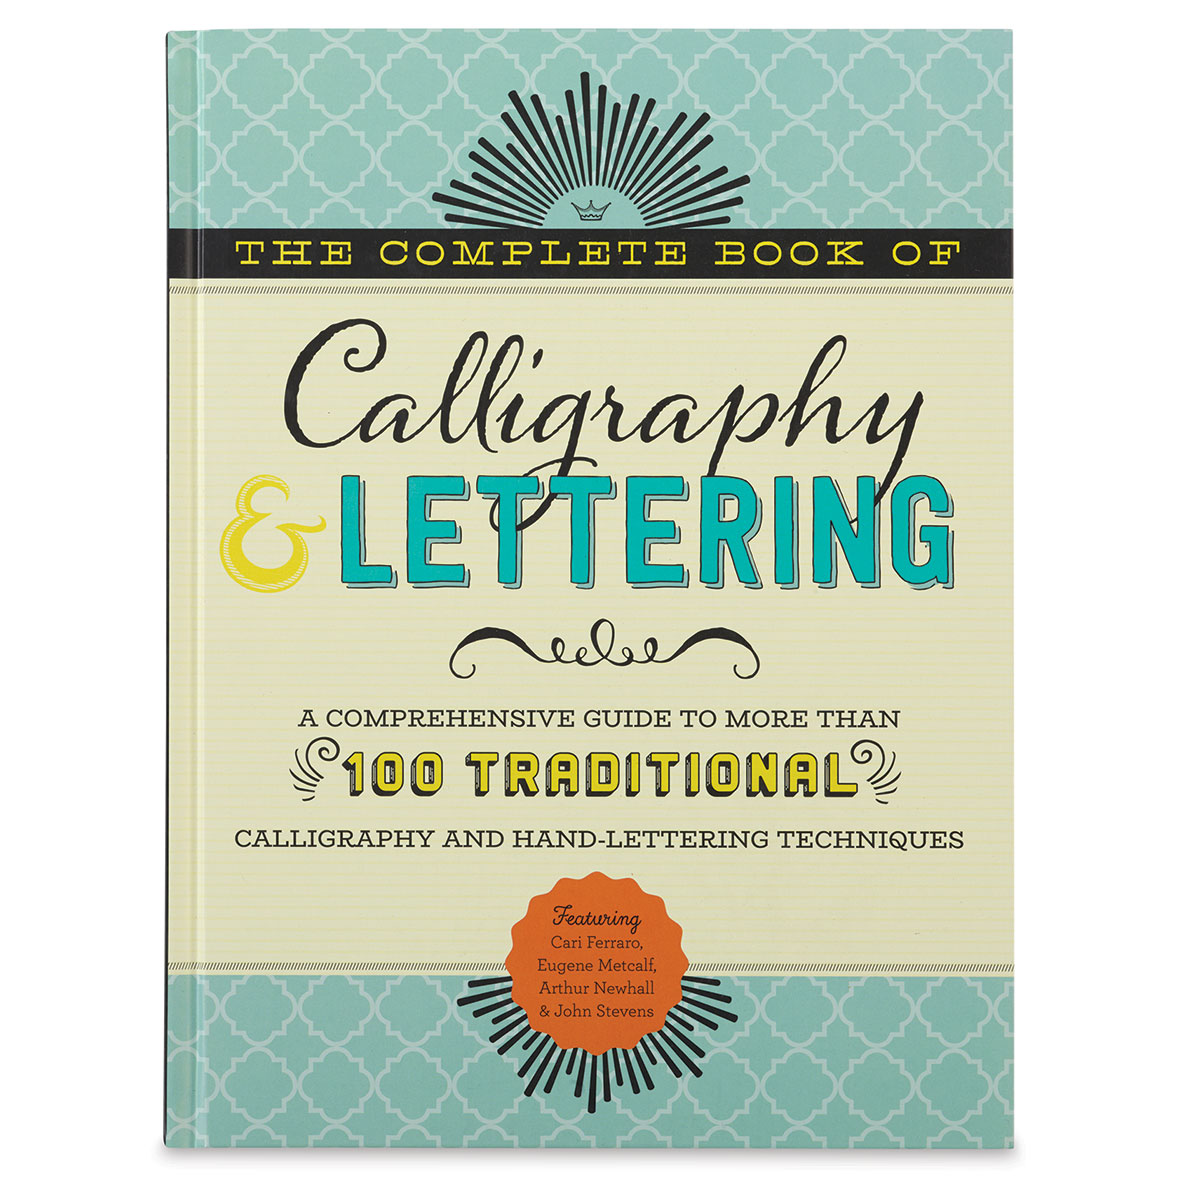 The Complete Book of Calligraphy & Lettering: A Comprehensive Guide to More Than 100 Traditional Calligraphy and Hand-lettering Techniques [Book]